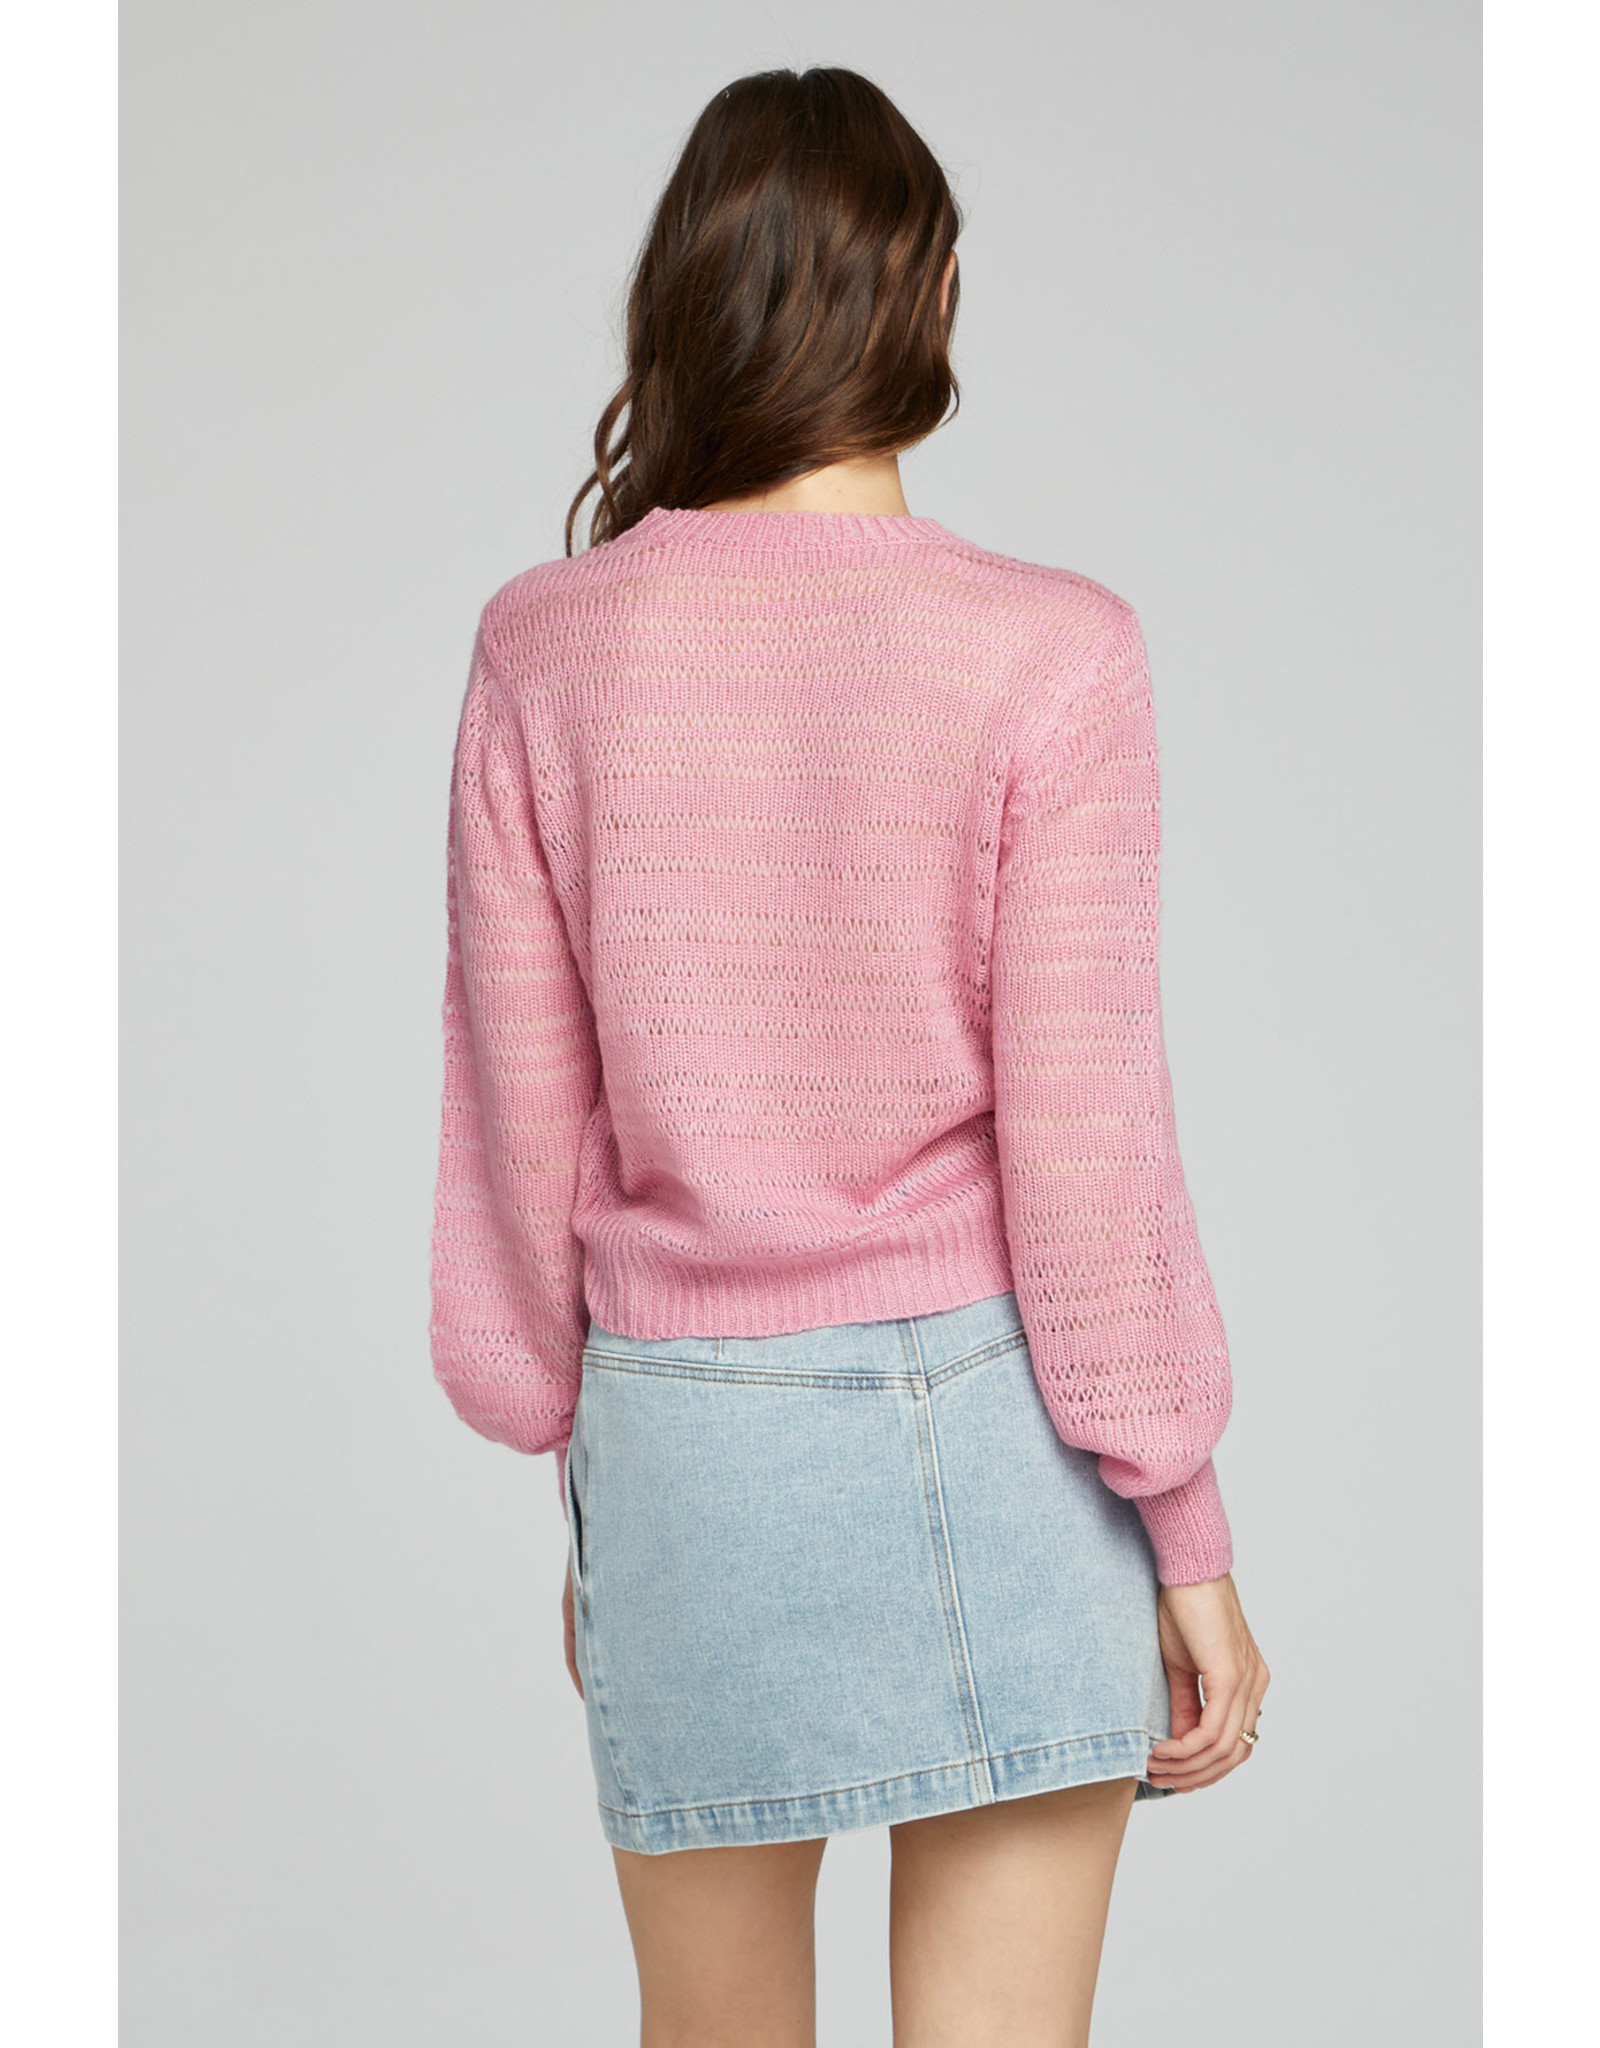 Saltwater luxe SWL Mabel Sweater